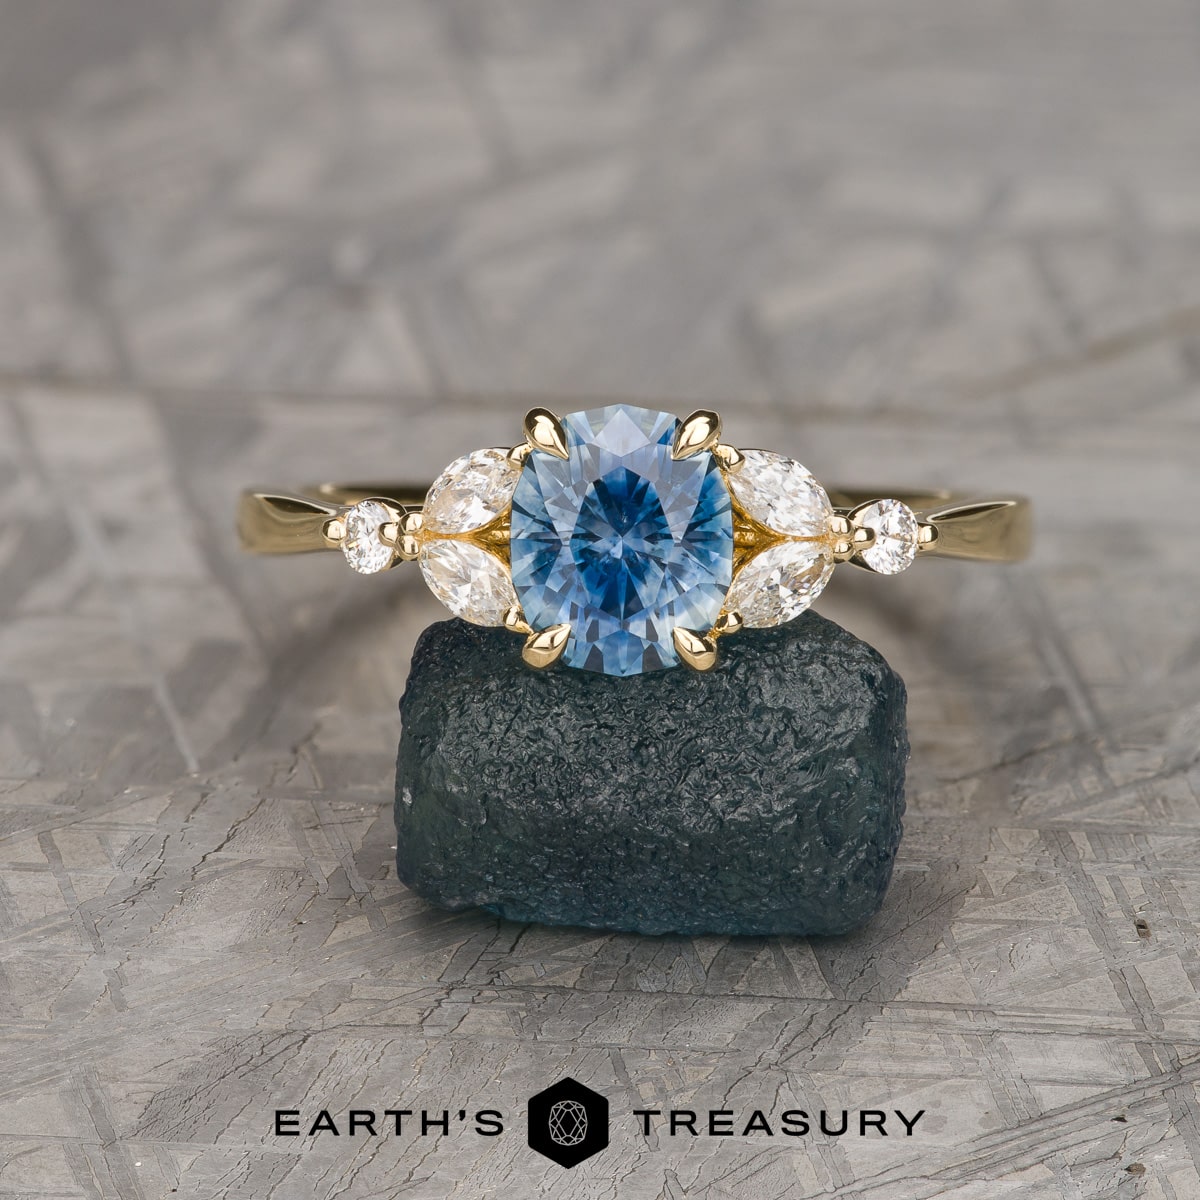 The “Cattleya” Ring in 18k yellow gold with 1.65-Carat Montana Sapphire